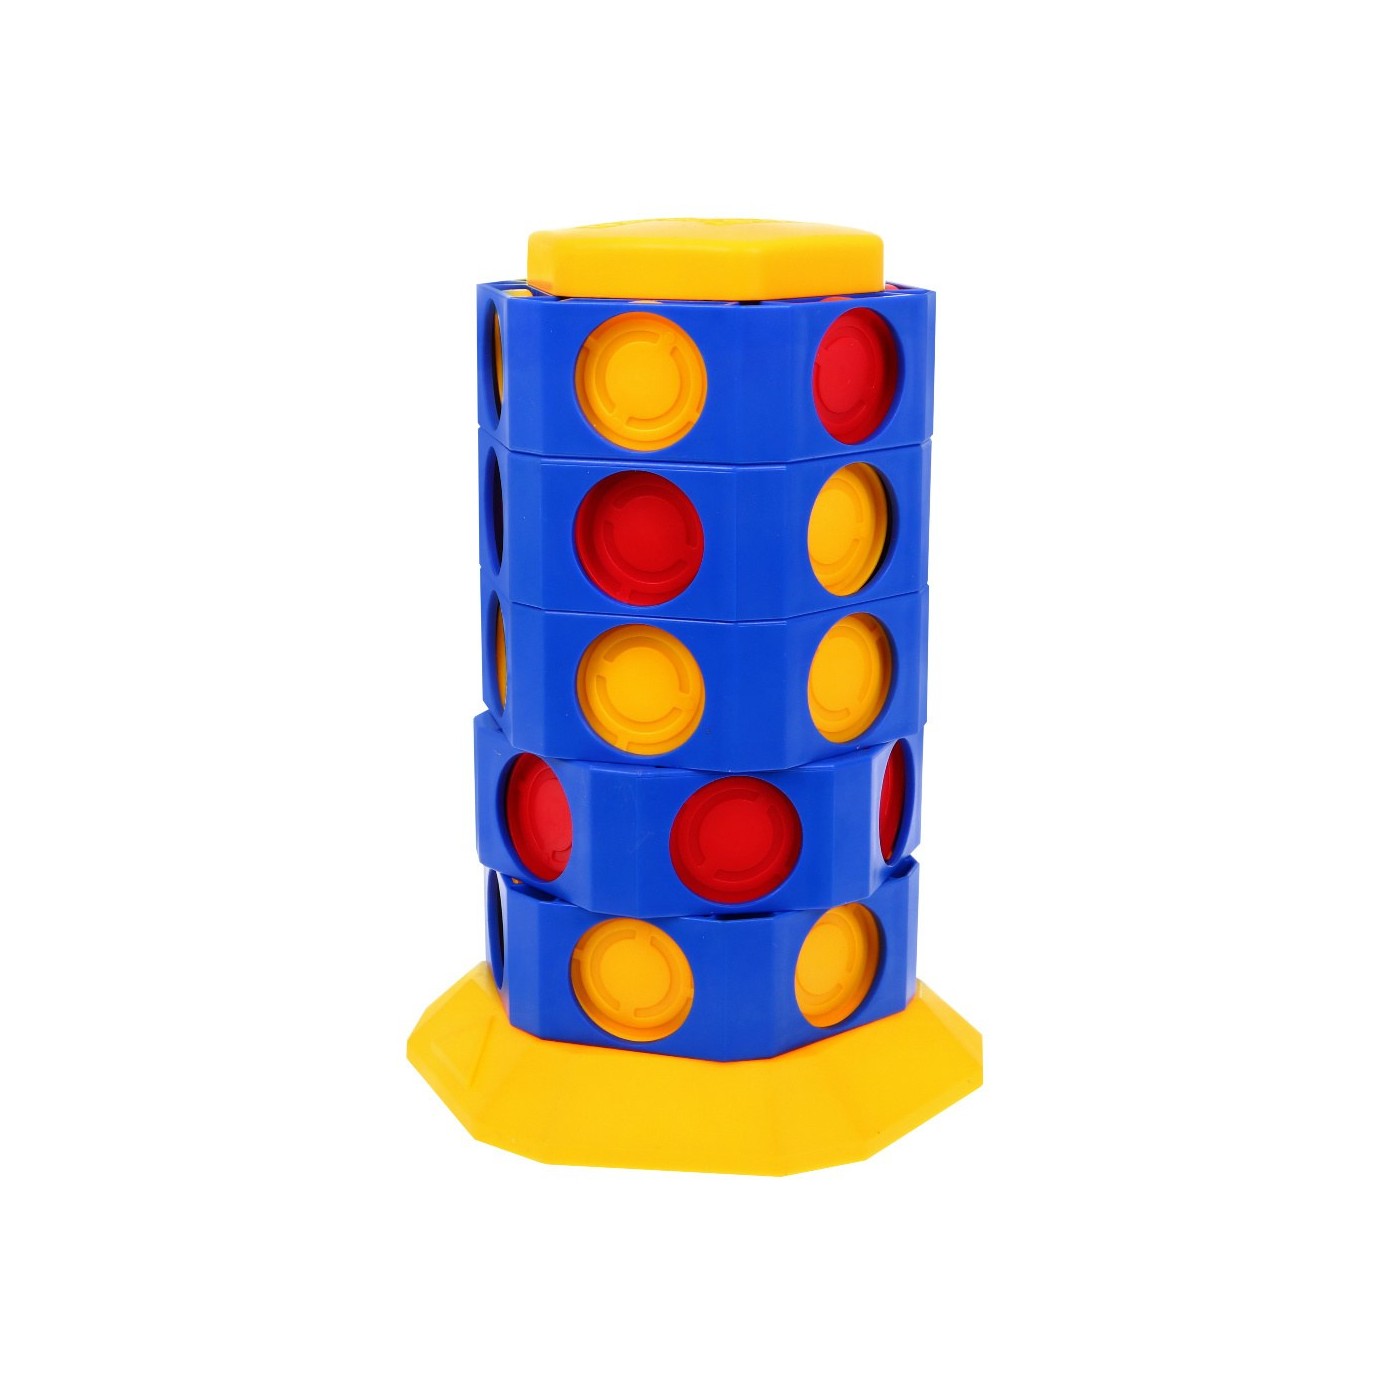 Connect 4 Twist and Turn